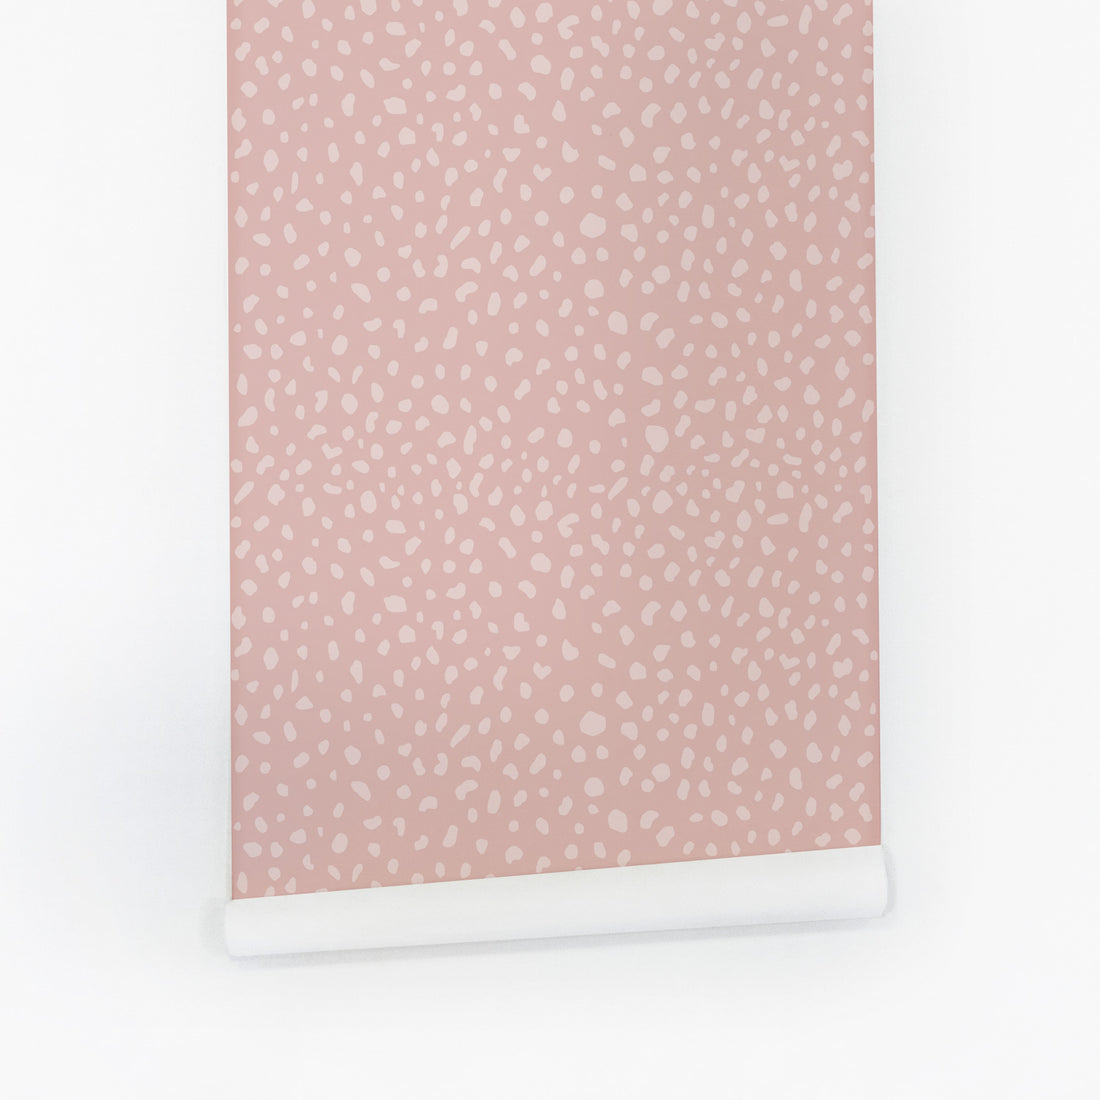 Pale pink animal print removable wallpaper by Livettes